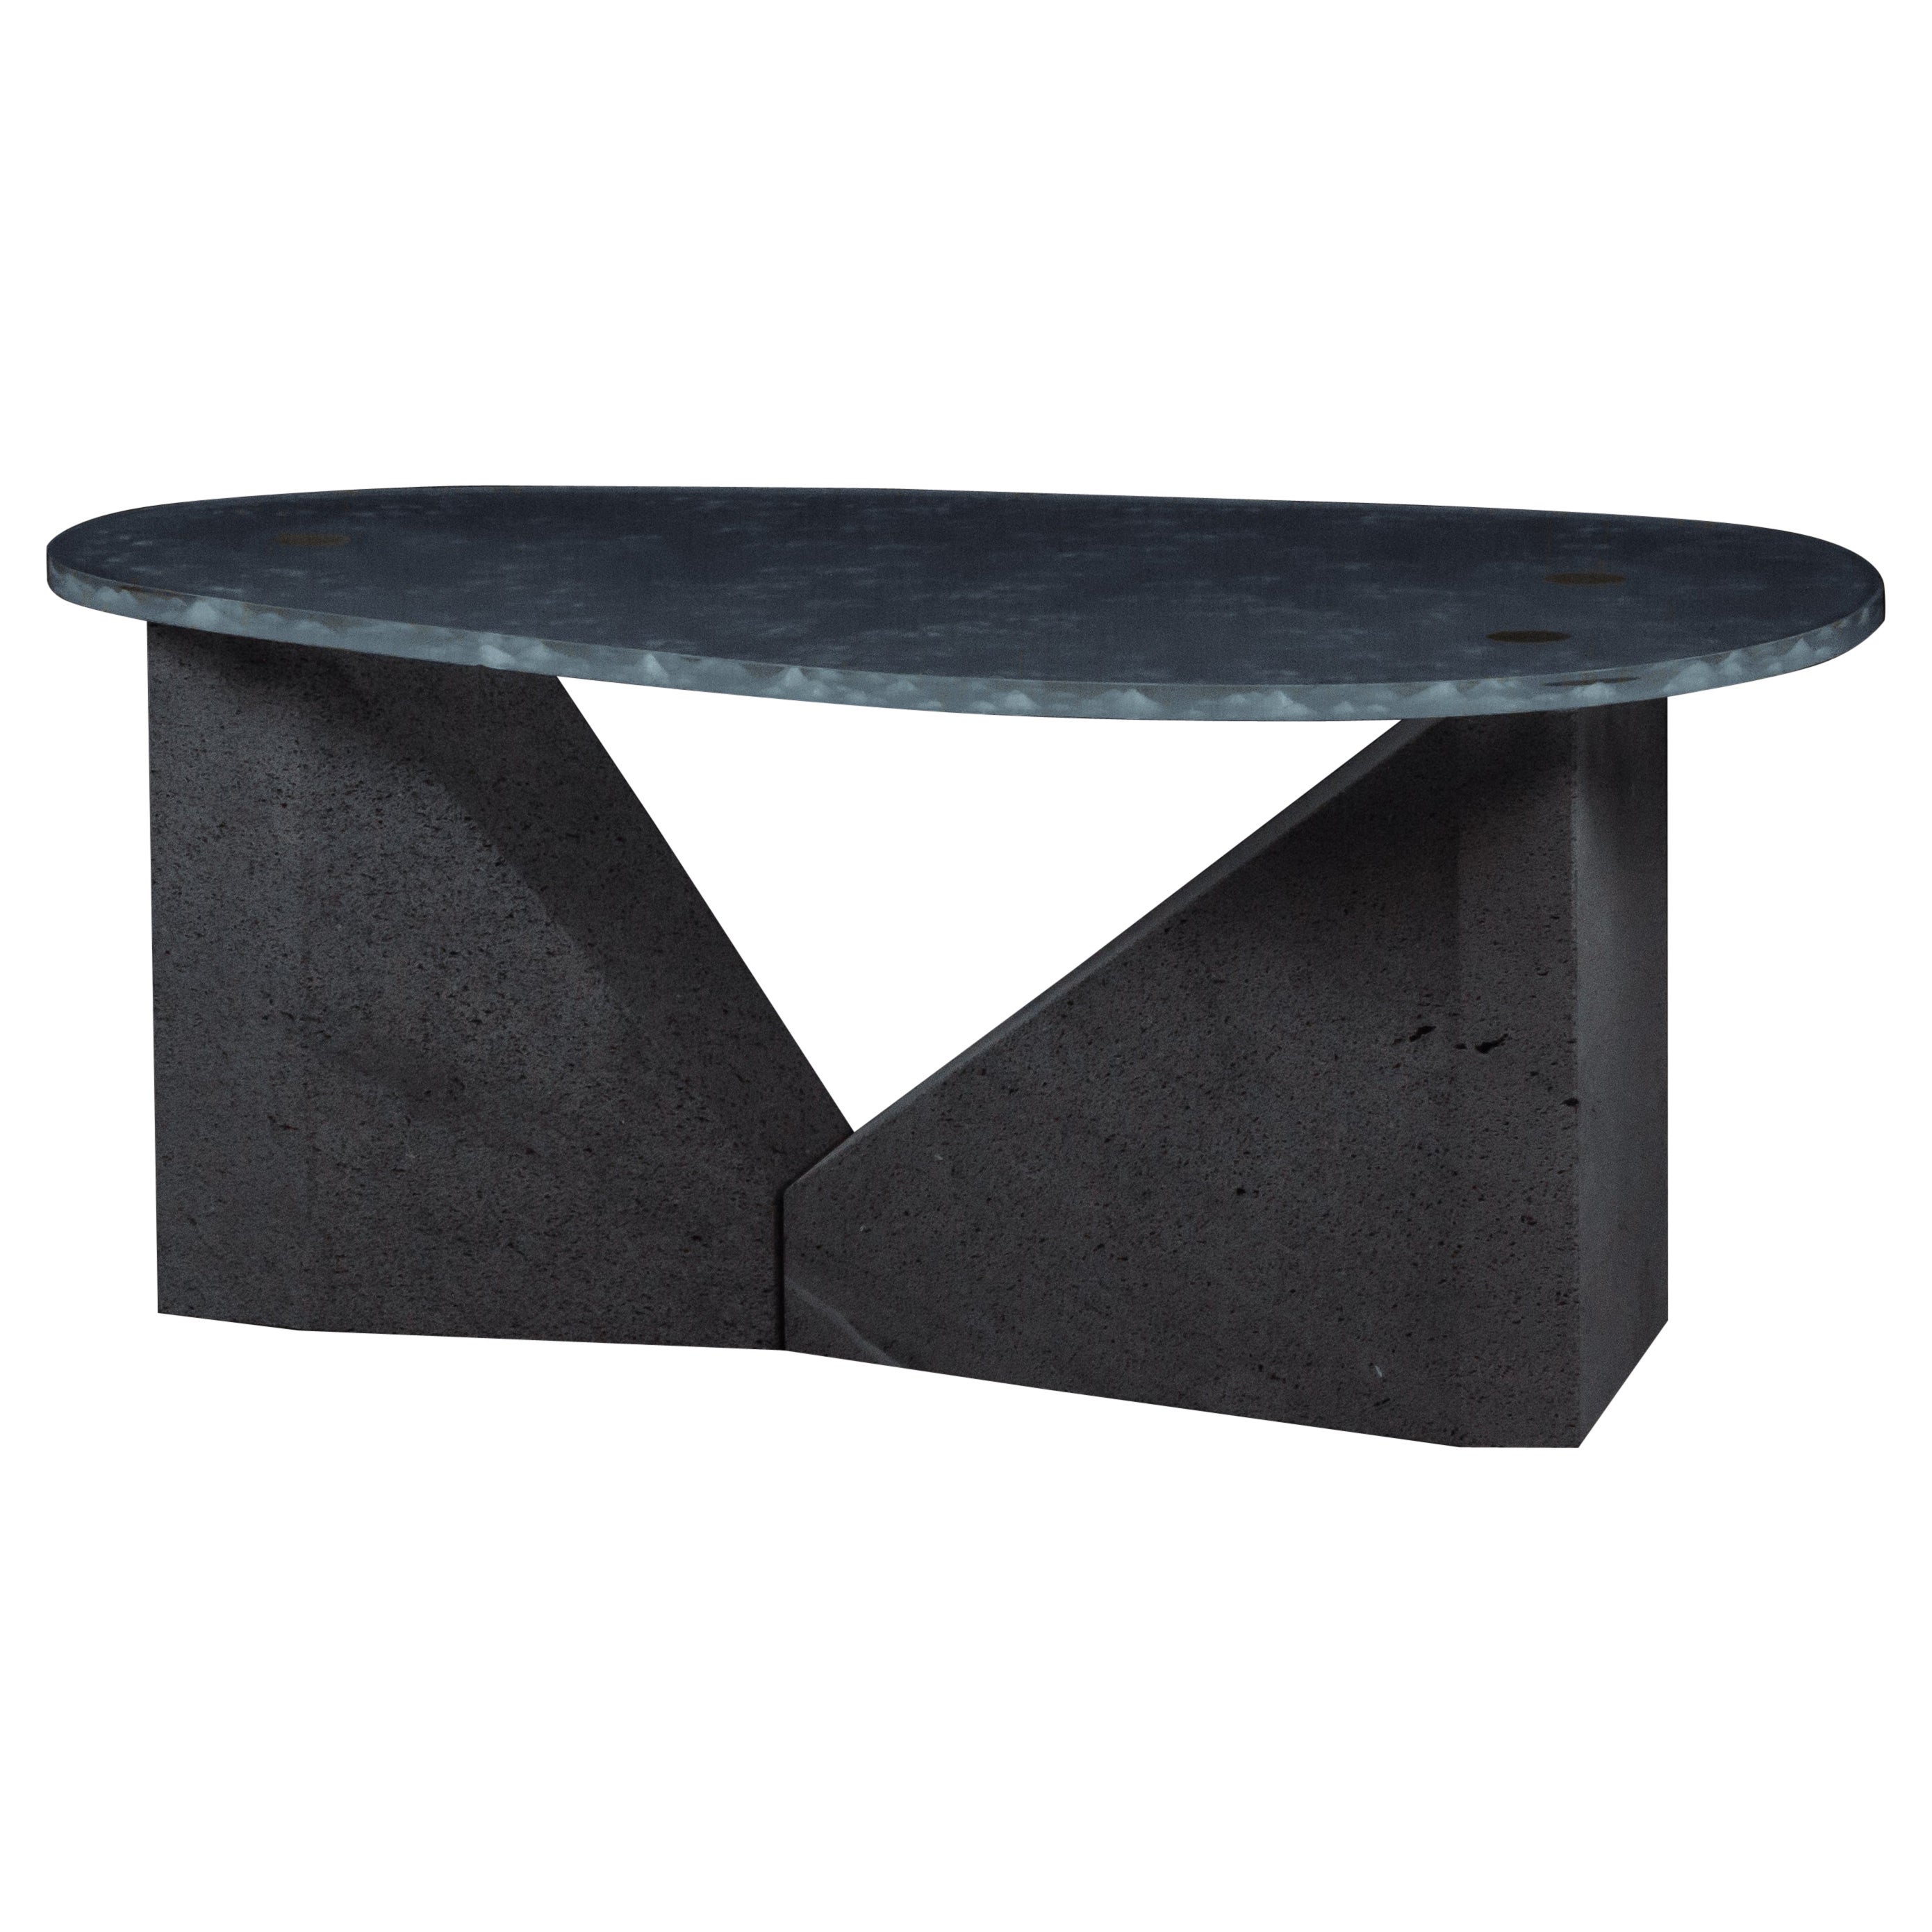 Bel Ava Table Glass and Lava Stone For Sale